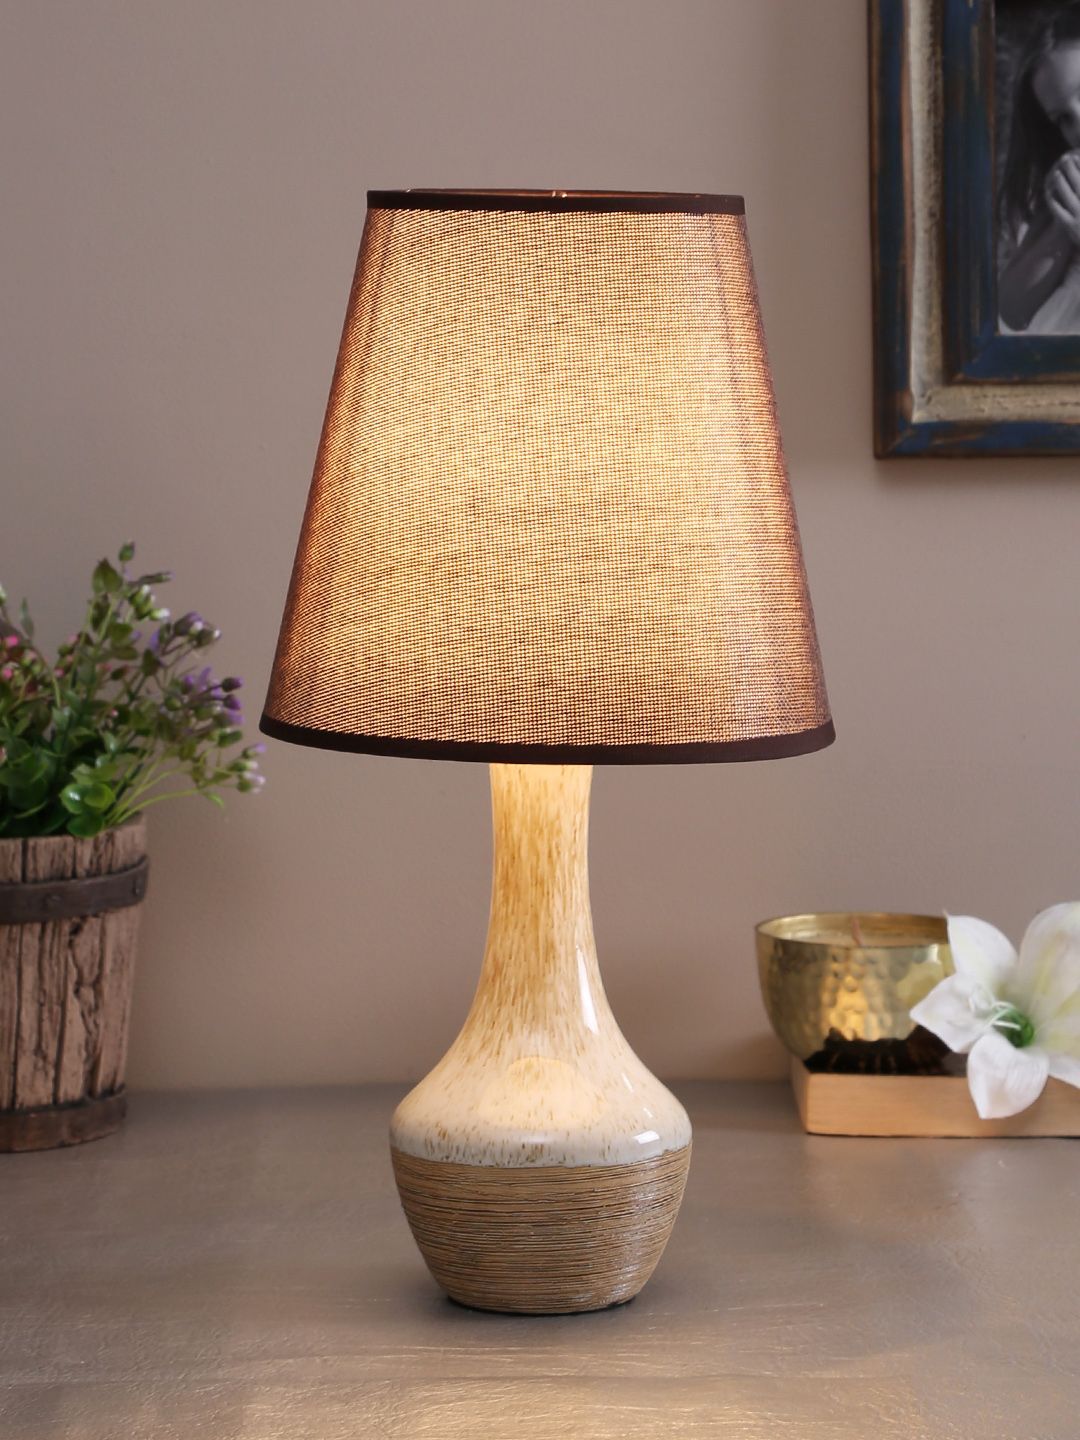 TAYHAA White & Brown Bedside Standard Table Lamp Price in India